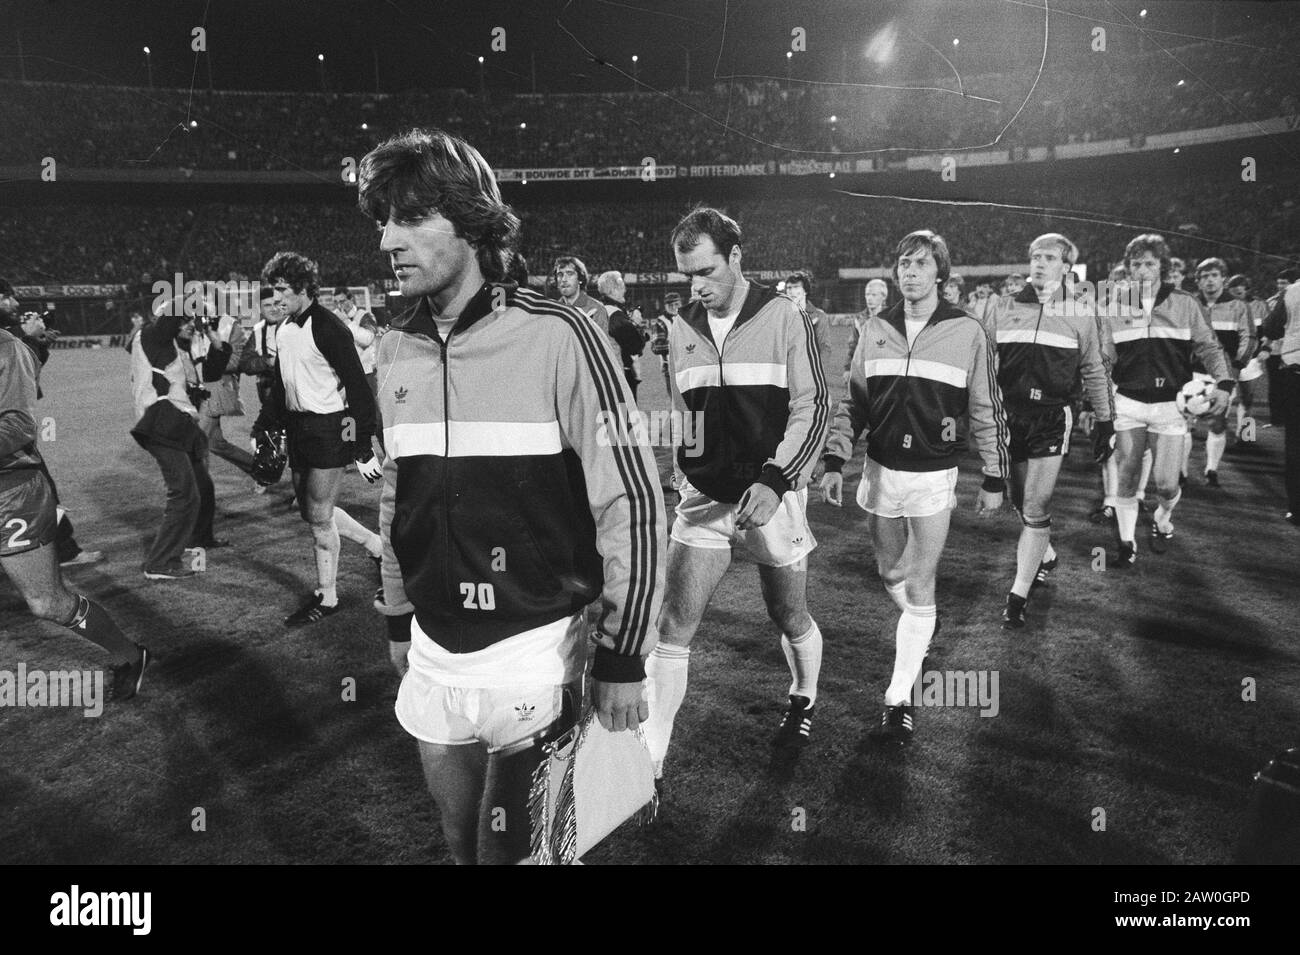 Football Netherlands-Belgium: 3-0. Preliminary World Cup Spain  Dutch team comes onto the pitch; front Krol Date: October 14, 1981 Location: Rotterdam, South Holland Keywords: teams, sports, football, soccer Person Name: Krol, Ruud Stock Photo